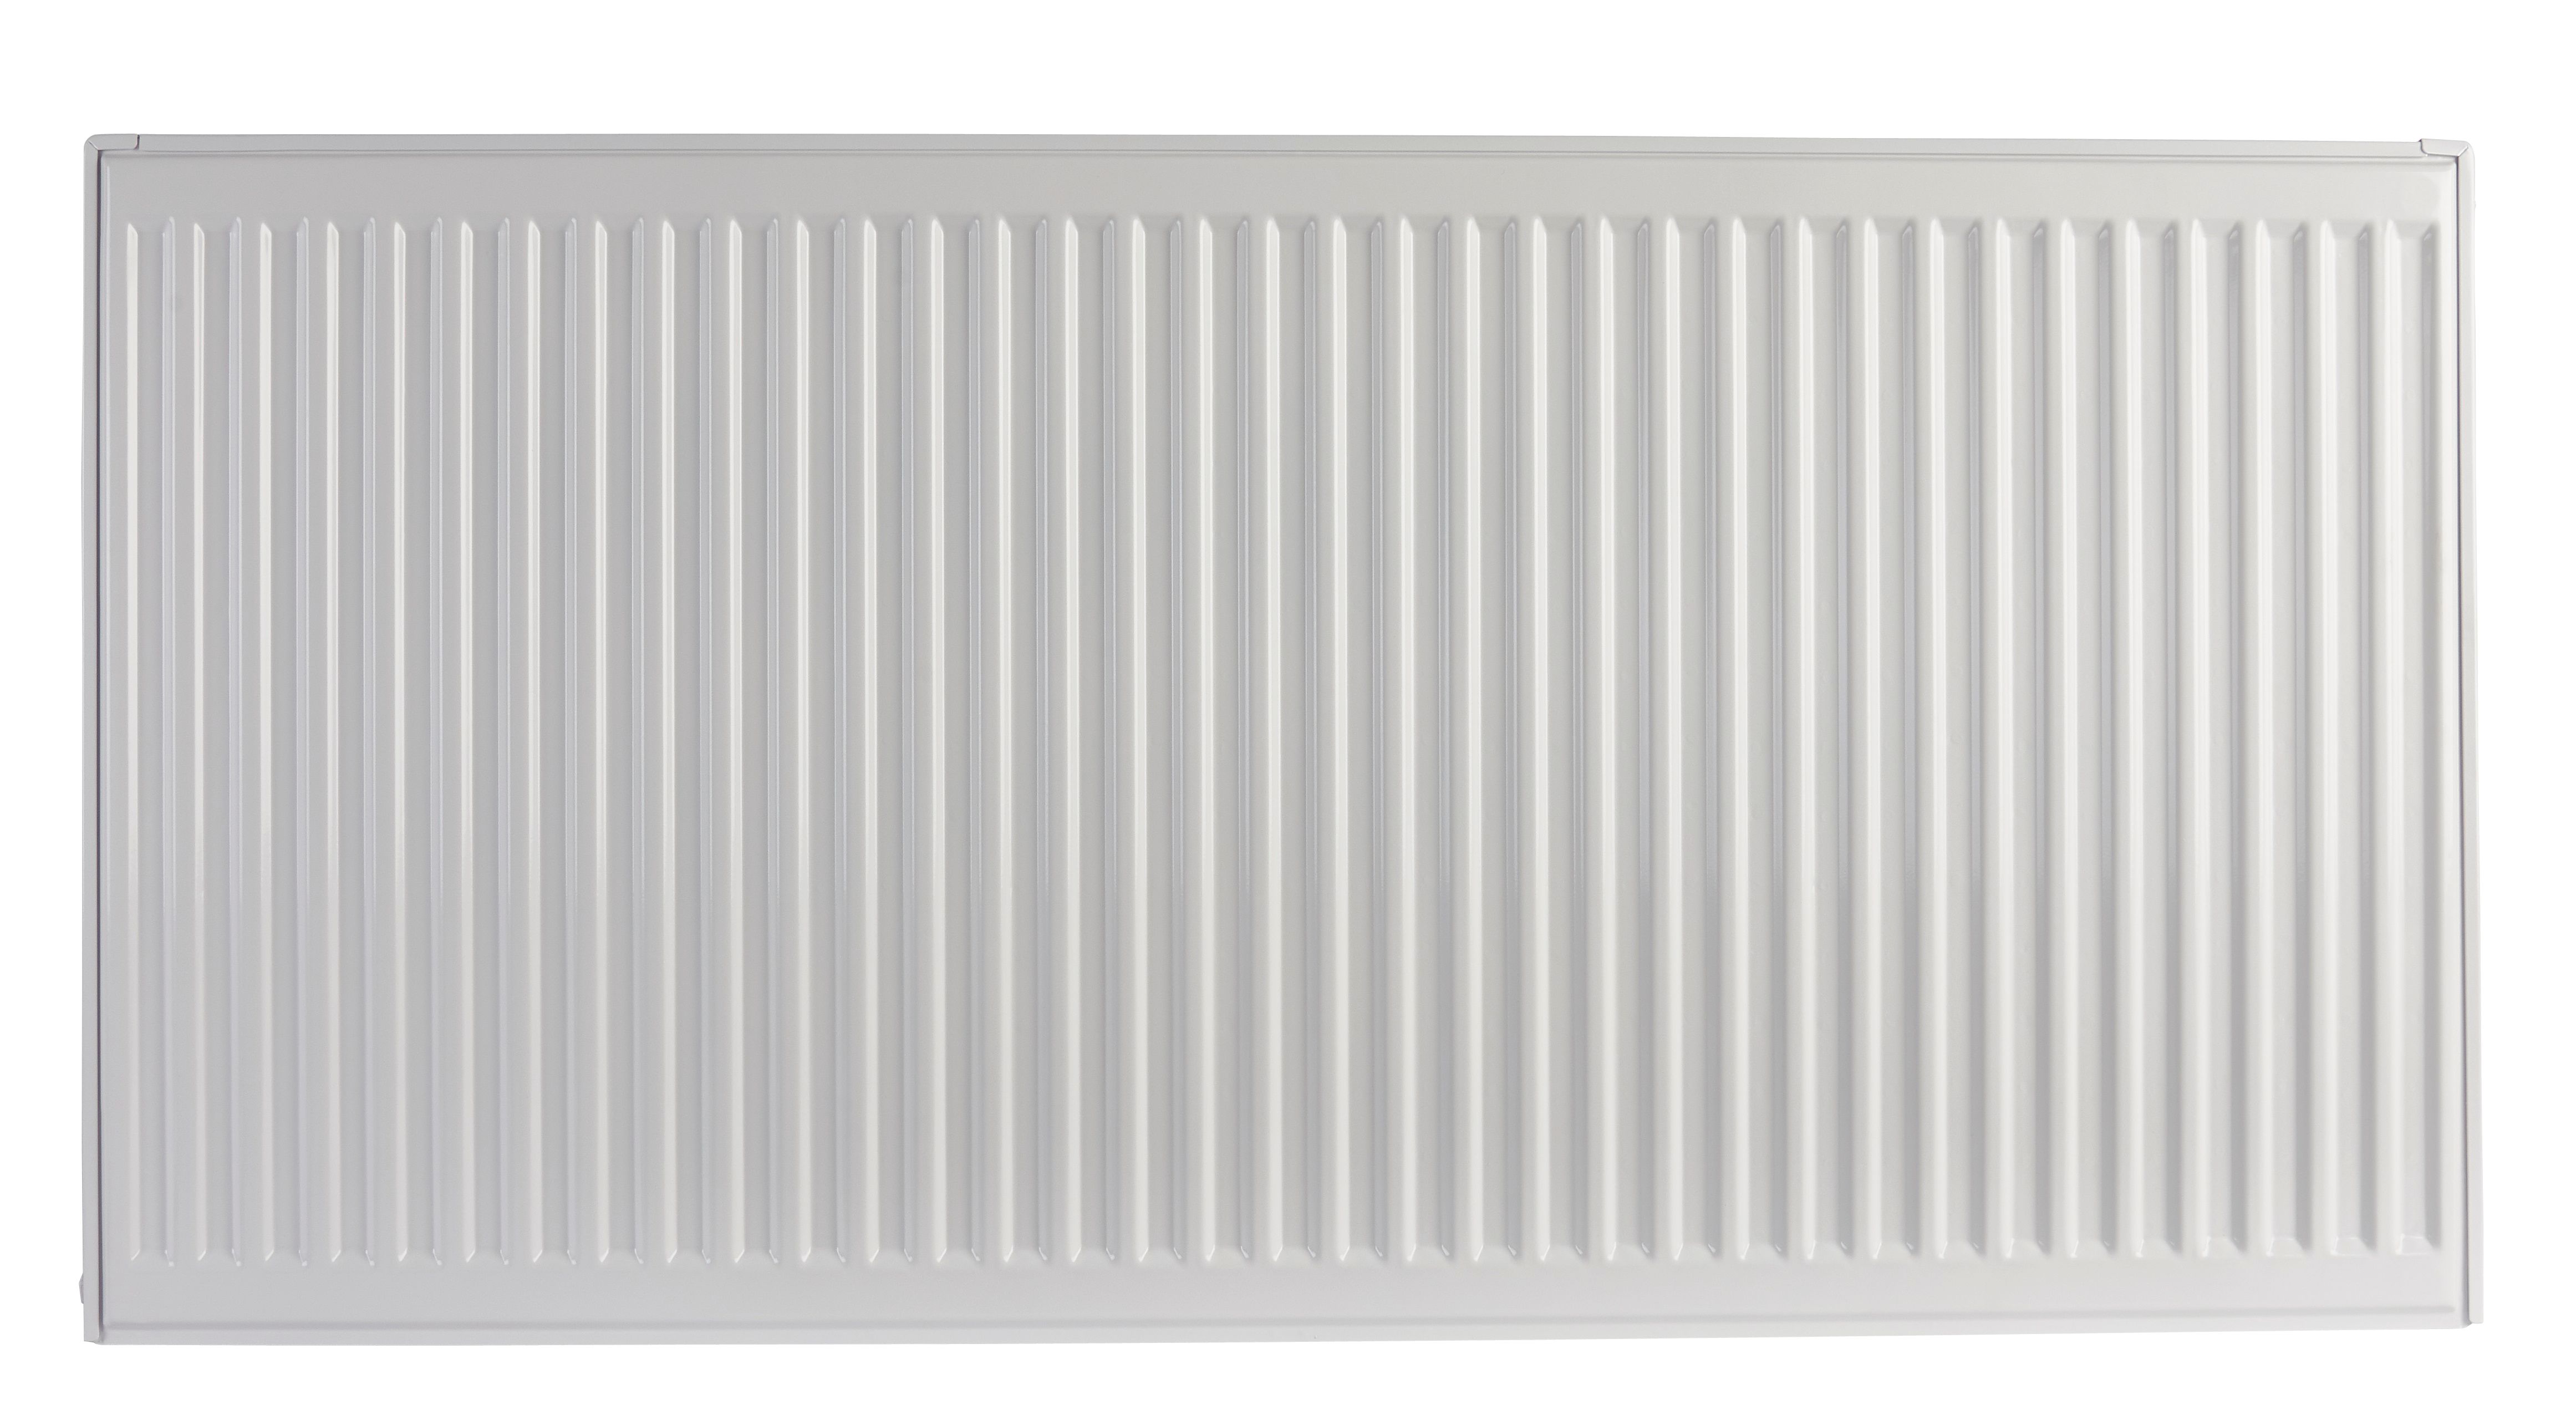 Image of Homeline by Stelrad 500 x 1600mm Type 21 Double Panel Plus Single Convector Radiator